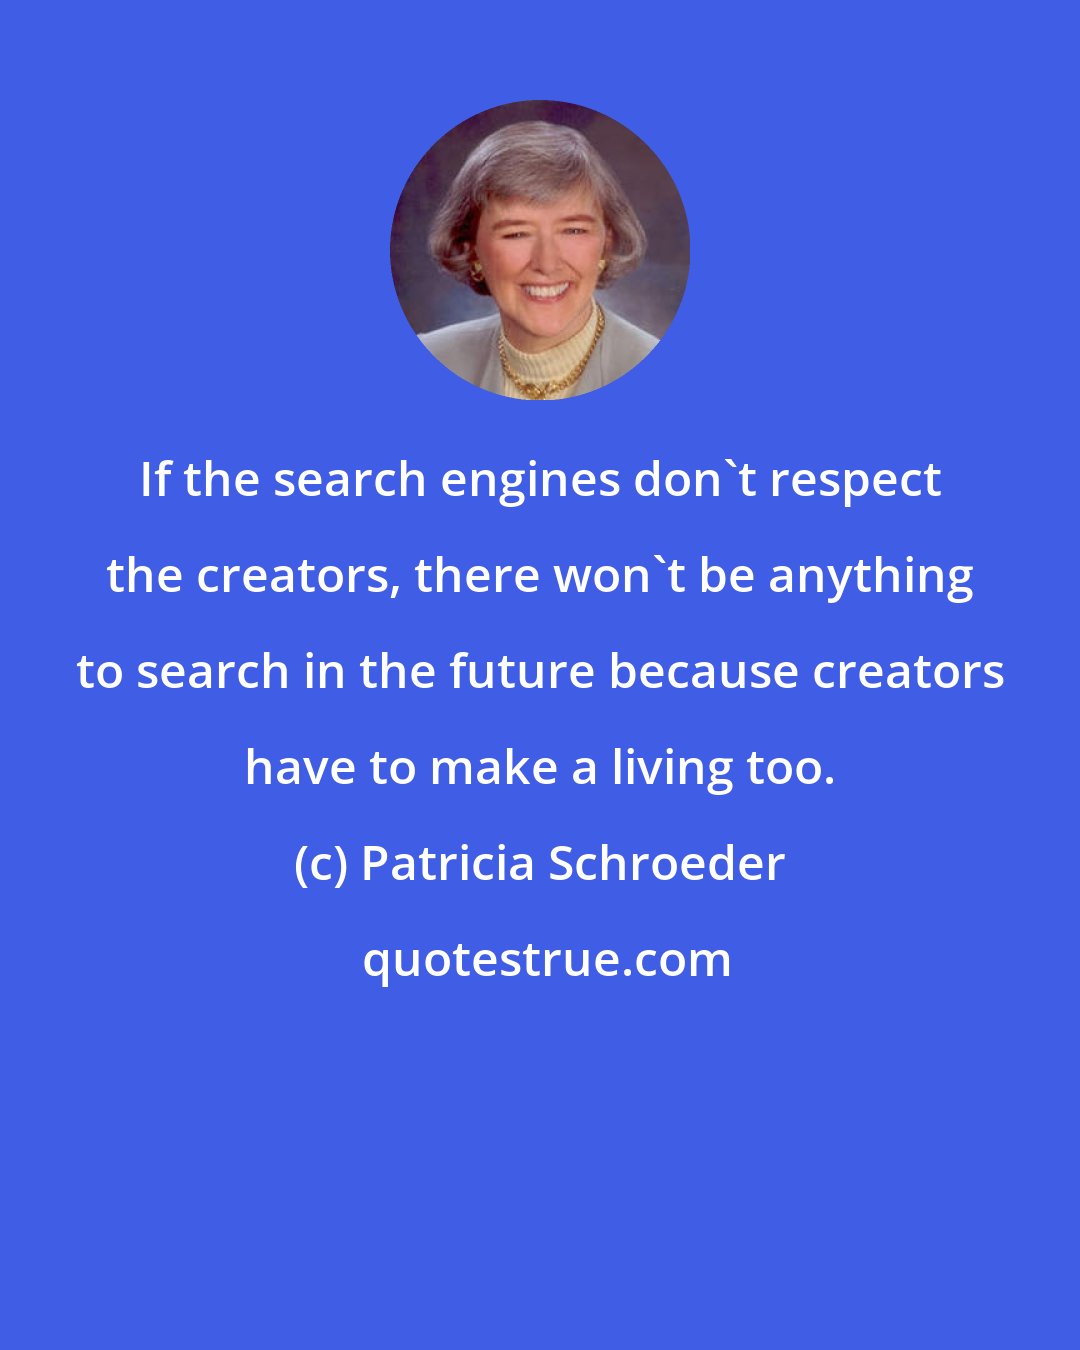 Patricia Schroeder: If the search engines don't respect the creators, there won't be anything to search in the future because creators have to make a living too.